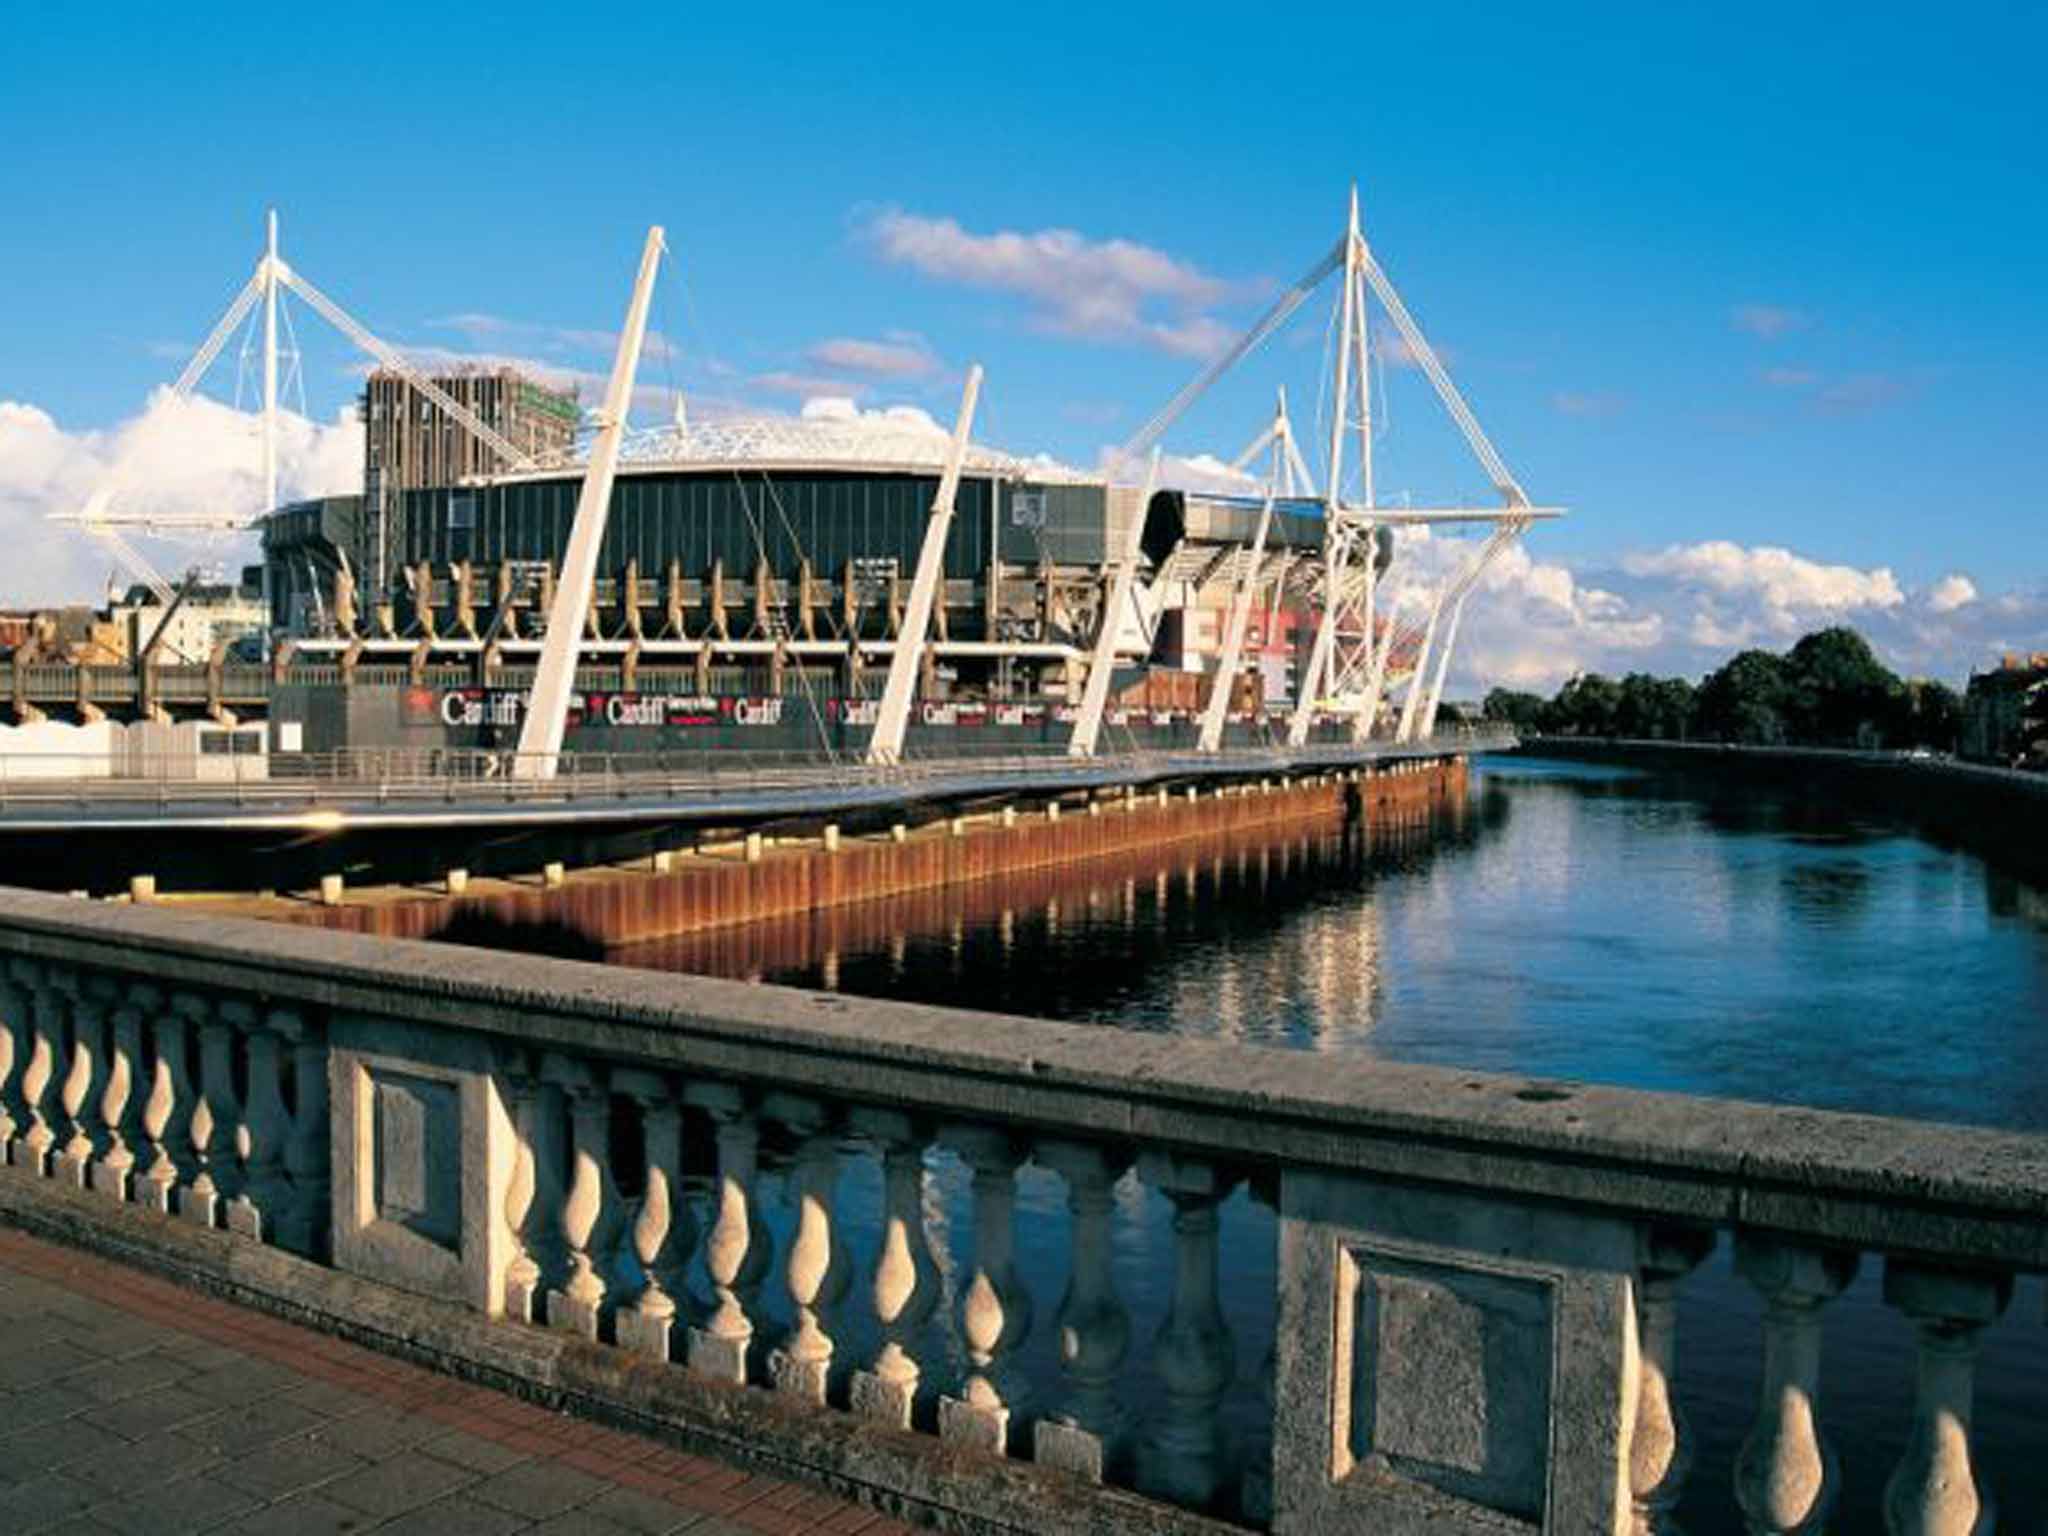 11 Best Hotels in Cardiff Bay, Cardiff